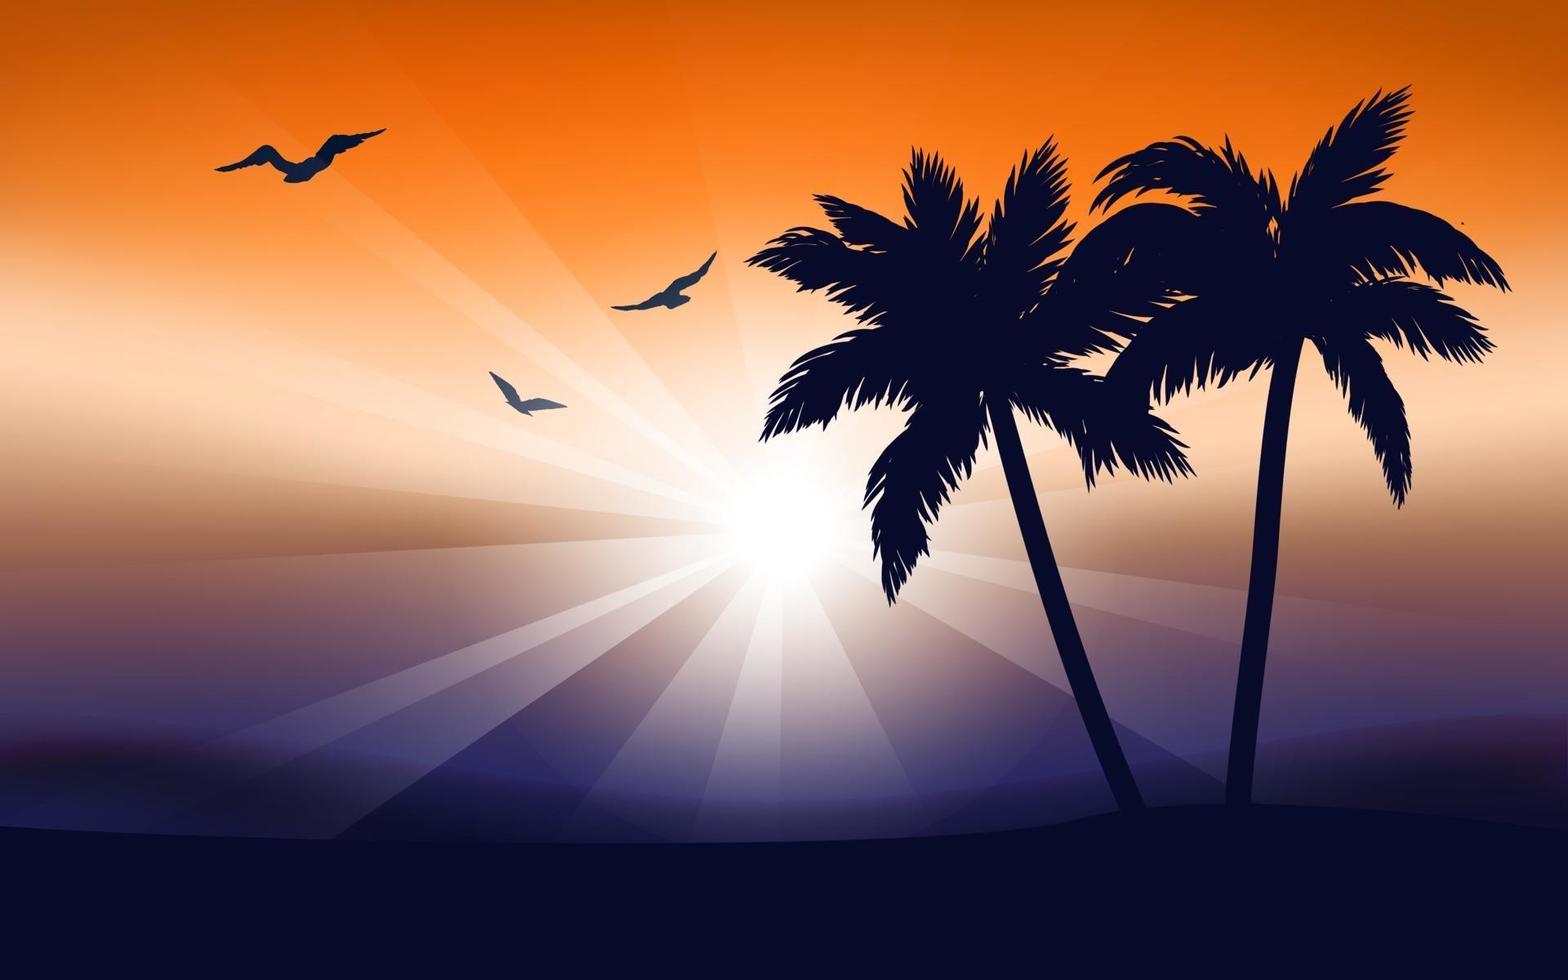 Tropical Landscape with Sunrise, Birds and Palm Trees vector